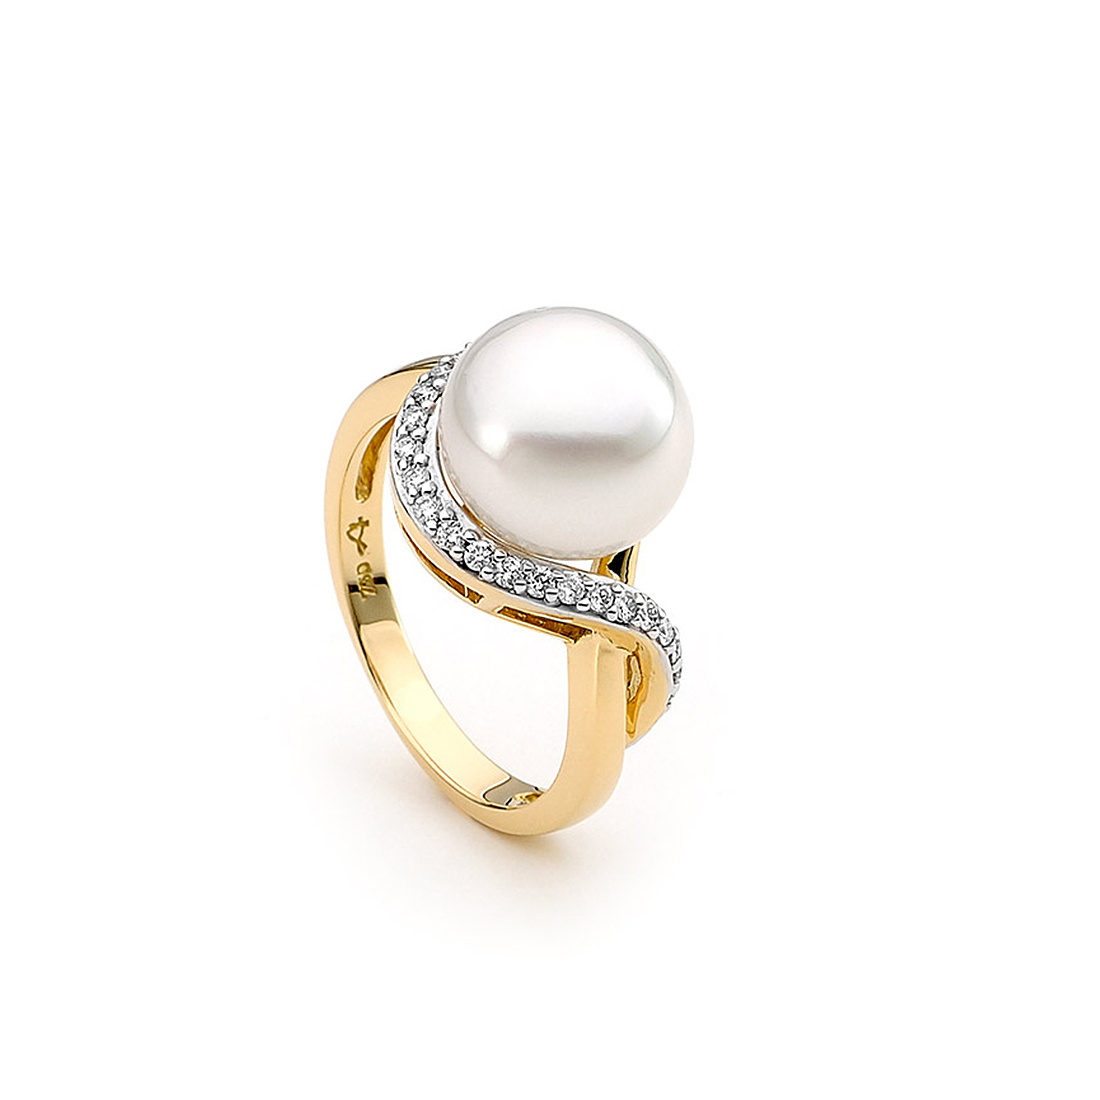 Allure South Sea Pearls | Pearl Jewellery in Sydney